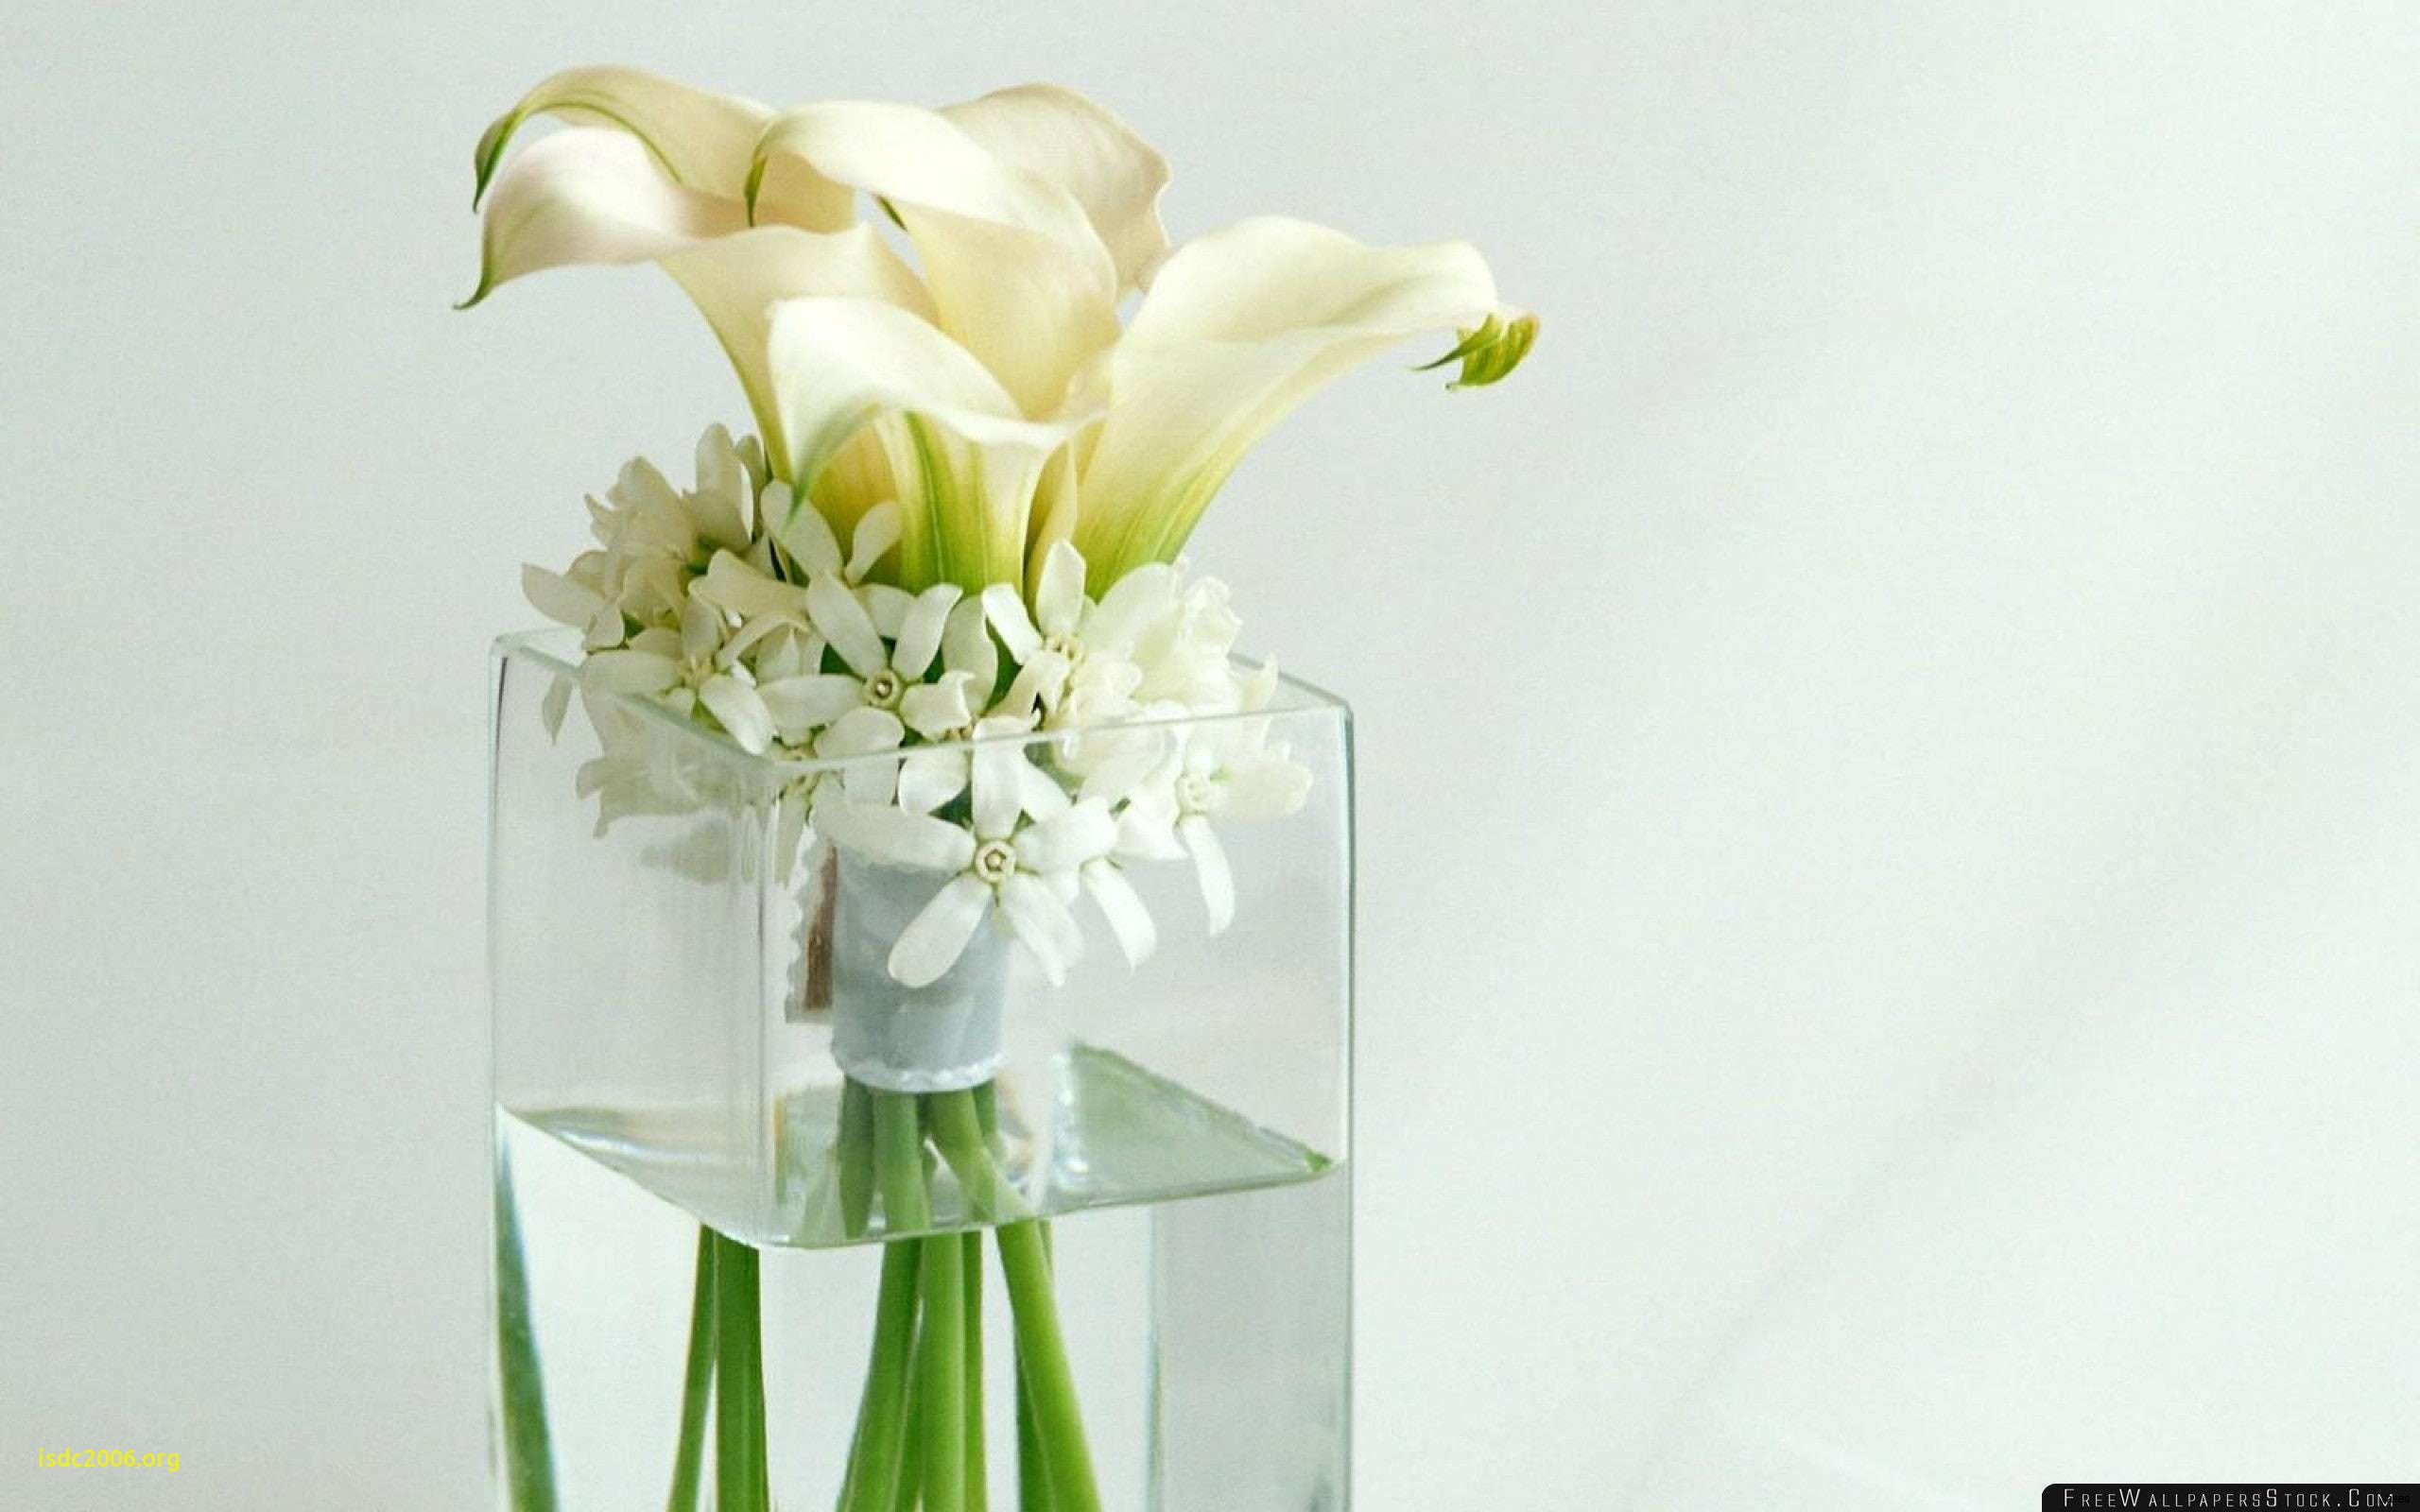 22 Famous Silk Flowers In Vase 2022 free download silk flowers in vase of elegant design house of flowers with regard to tall vase centerpiece ideas vases flowers in water 0d artificial inspiration glass vase centerpiece ideas